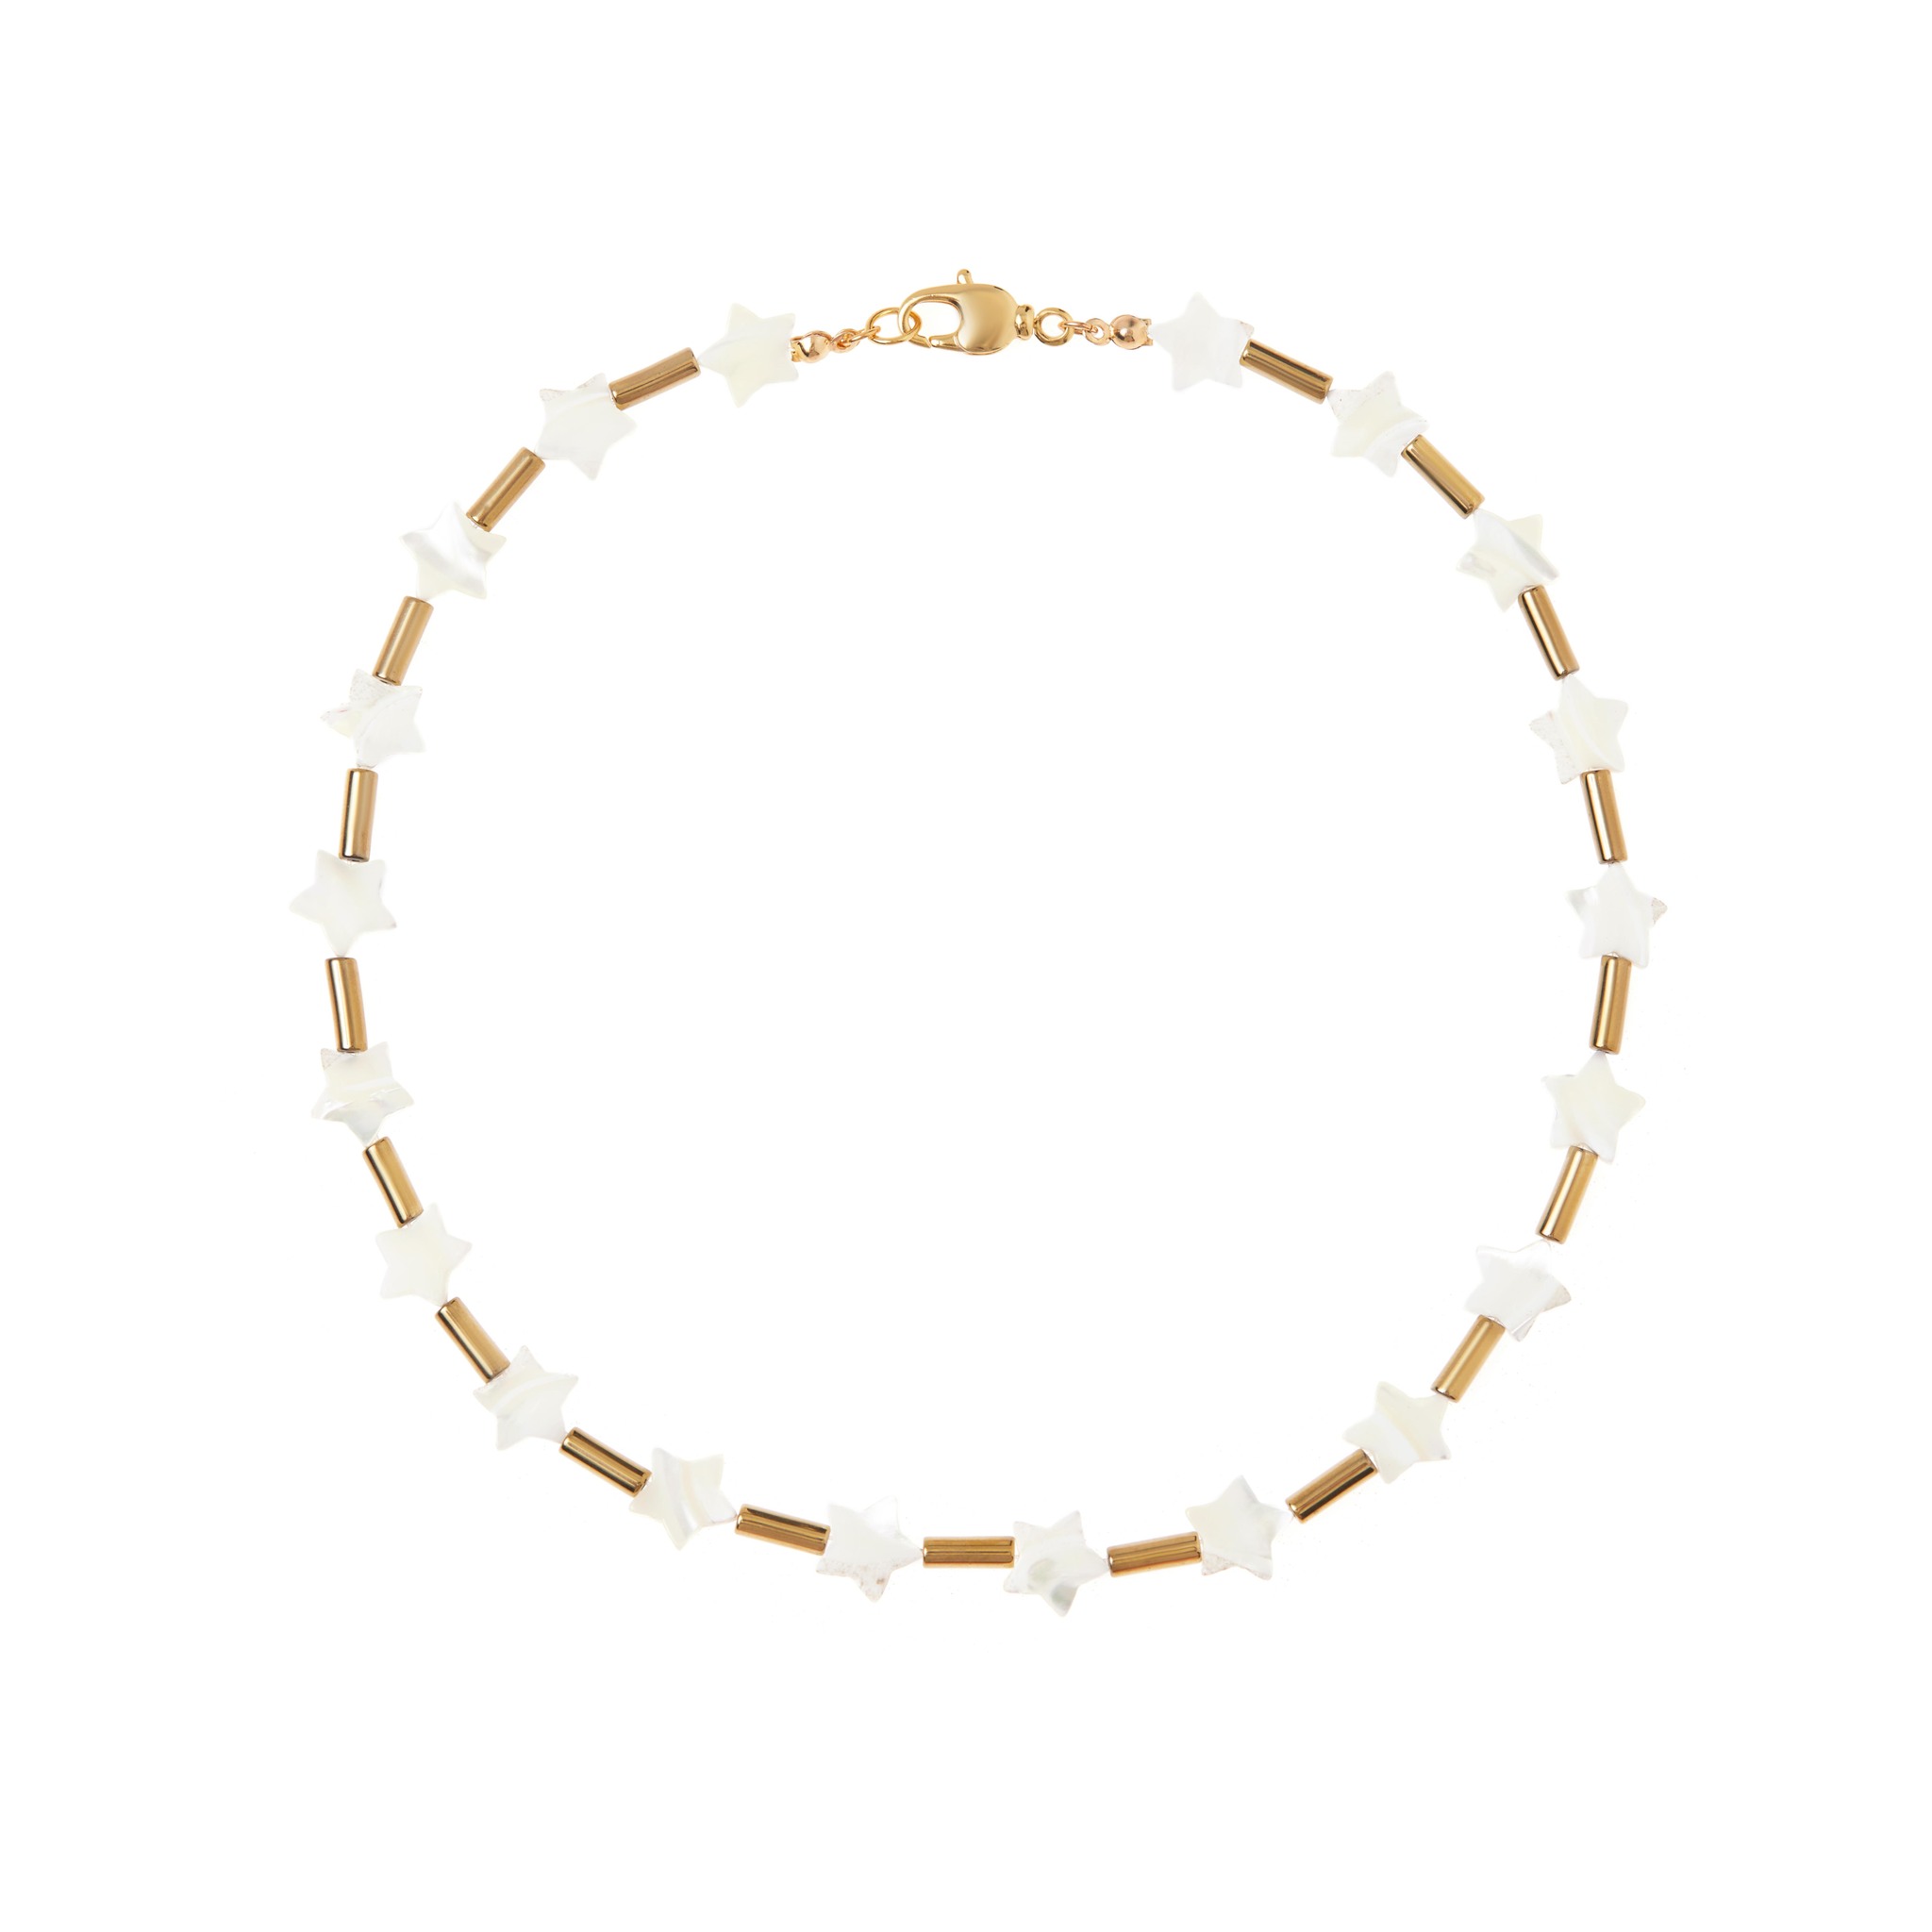 HOLLY JUNE White Milky Way Necklace